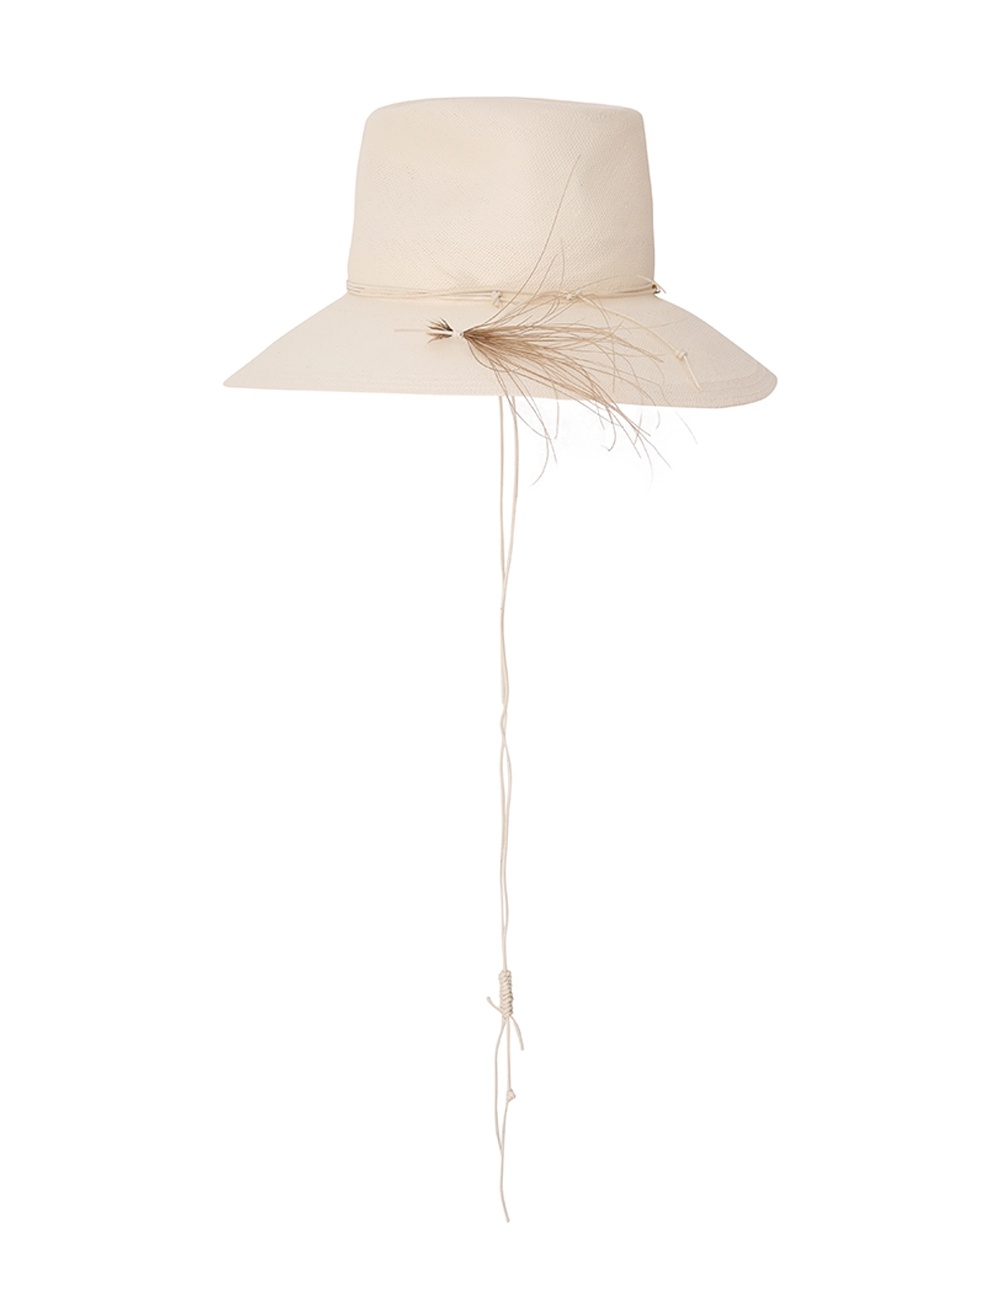 GLAZED STRAW COLLAPSIBLE HAT - 3